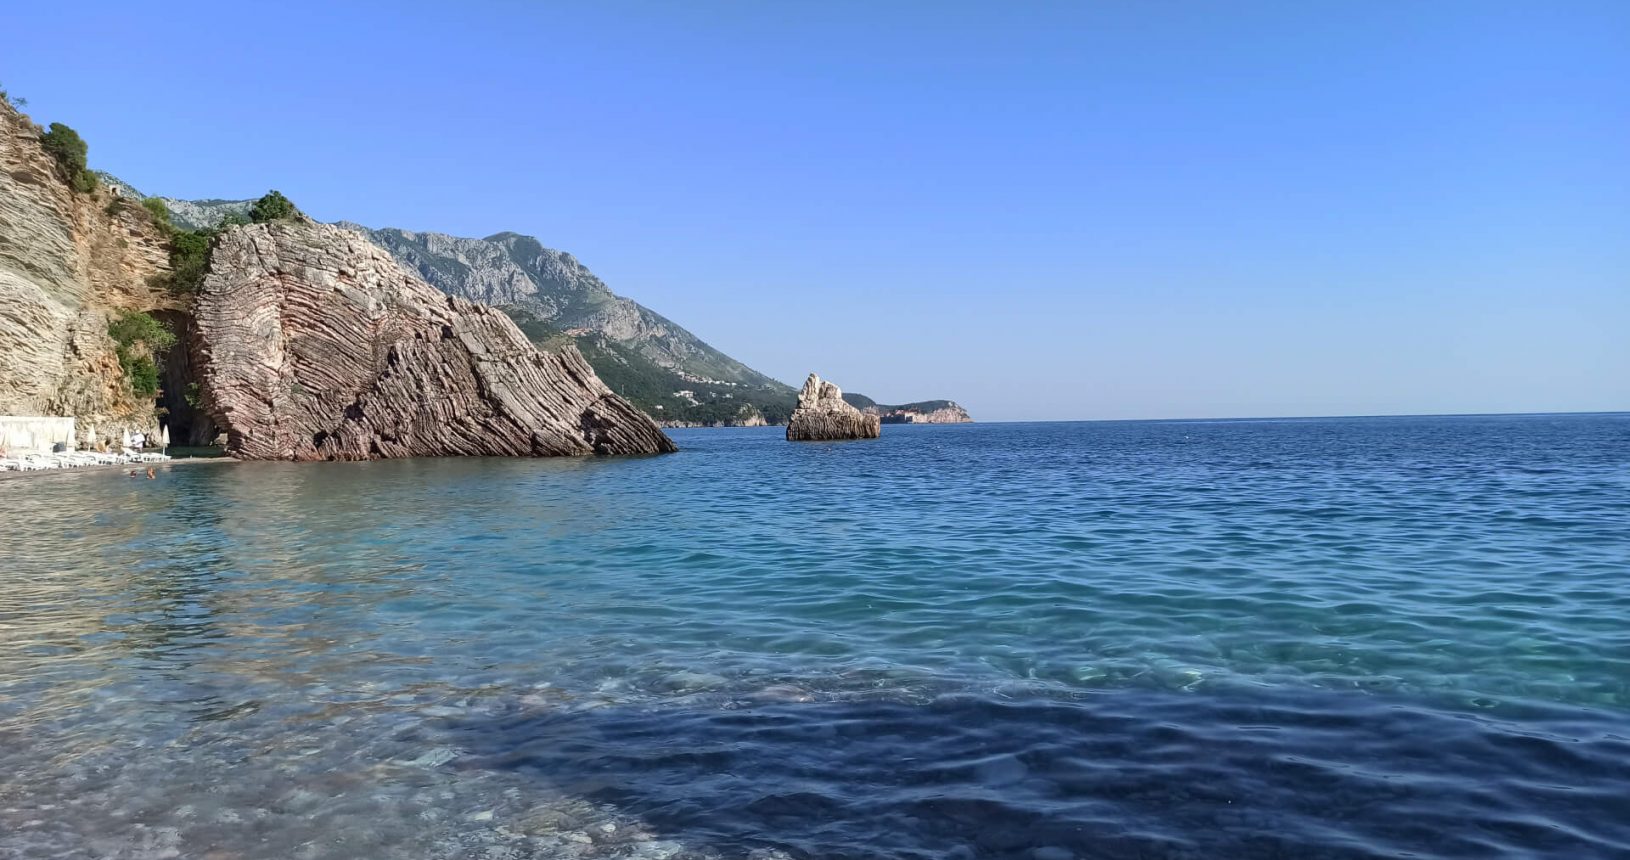 Incredible transparent water and view at Rafailovici rocky beach